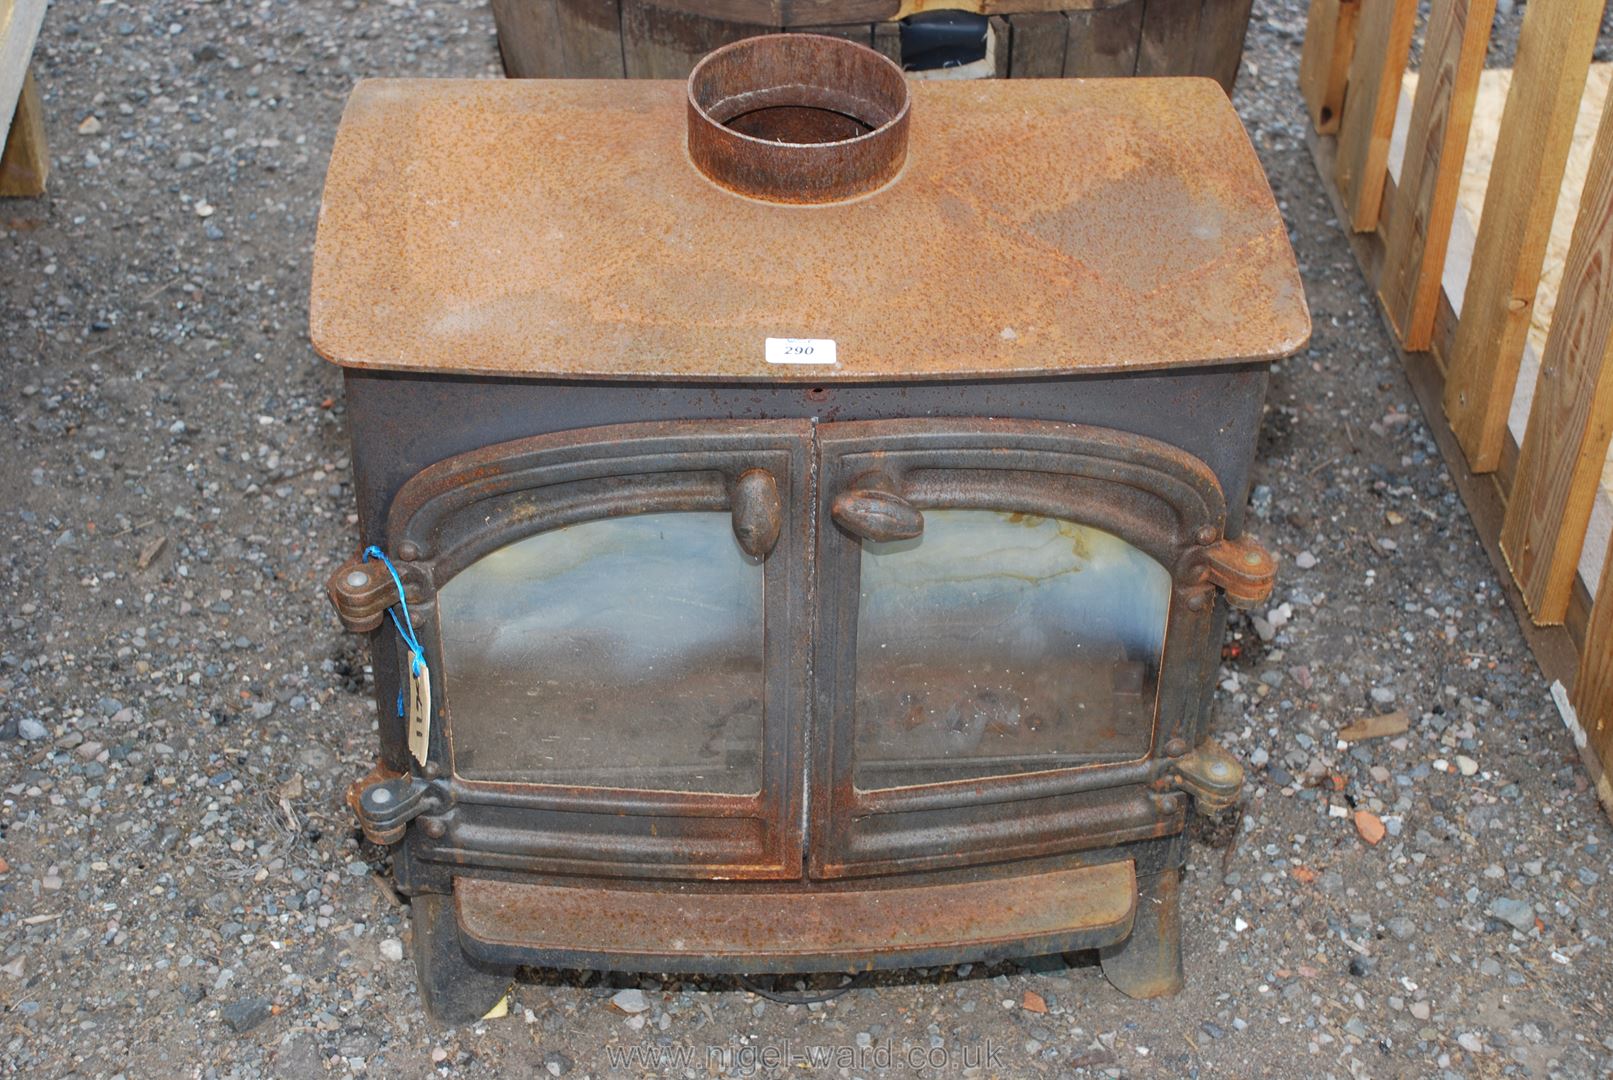 A cast solid fuel fire.